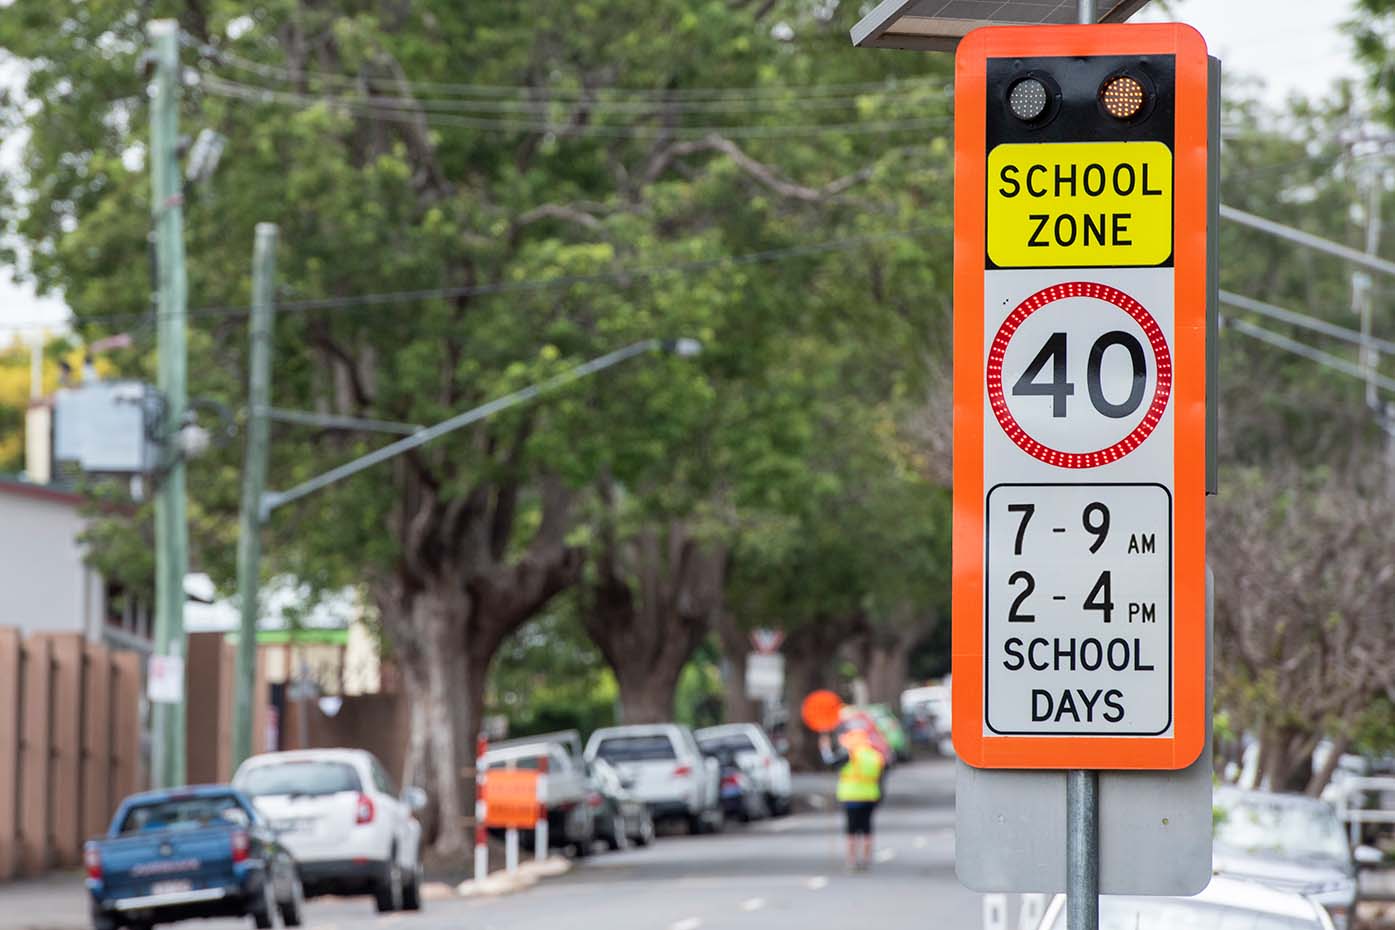 School zone sign that states drivers must drive at 40km's between 7am to 9am and 2pm to 4pm